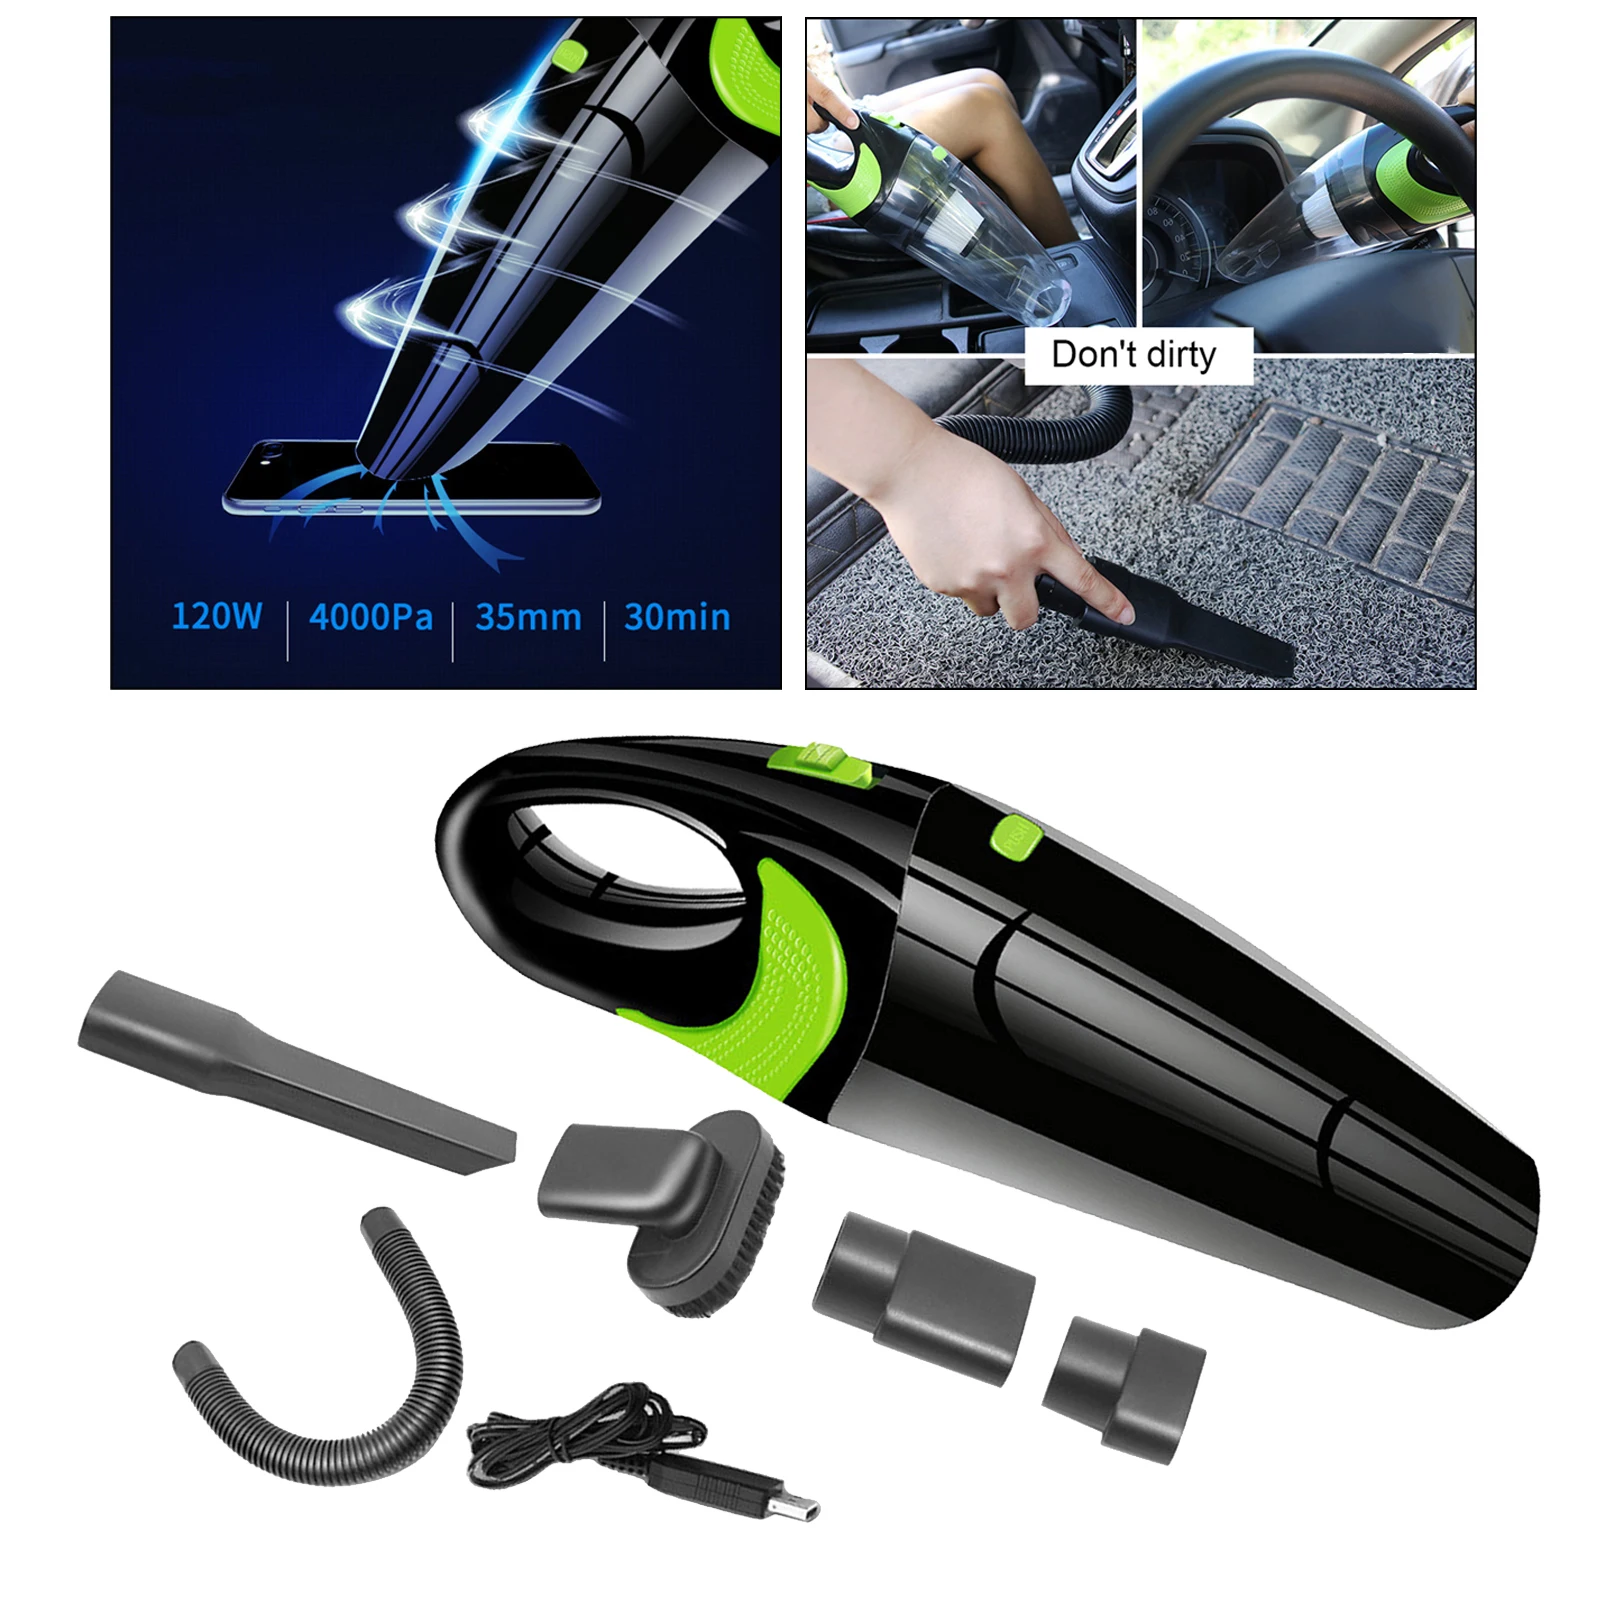 Mini Portable Car Vacuum Cleaner Handheld Cleaner 4000Pa 120W Suction Cleaning 